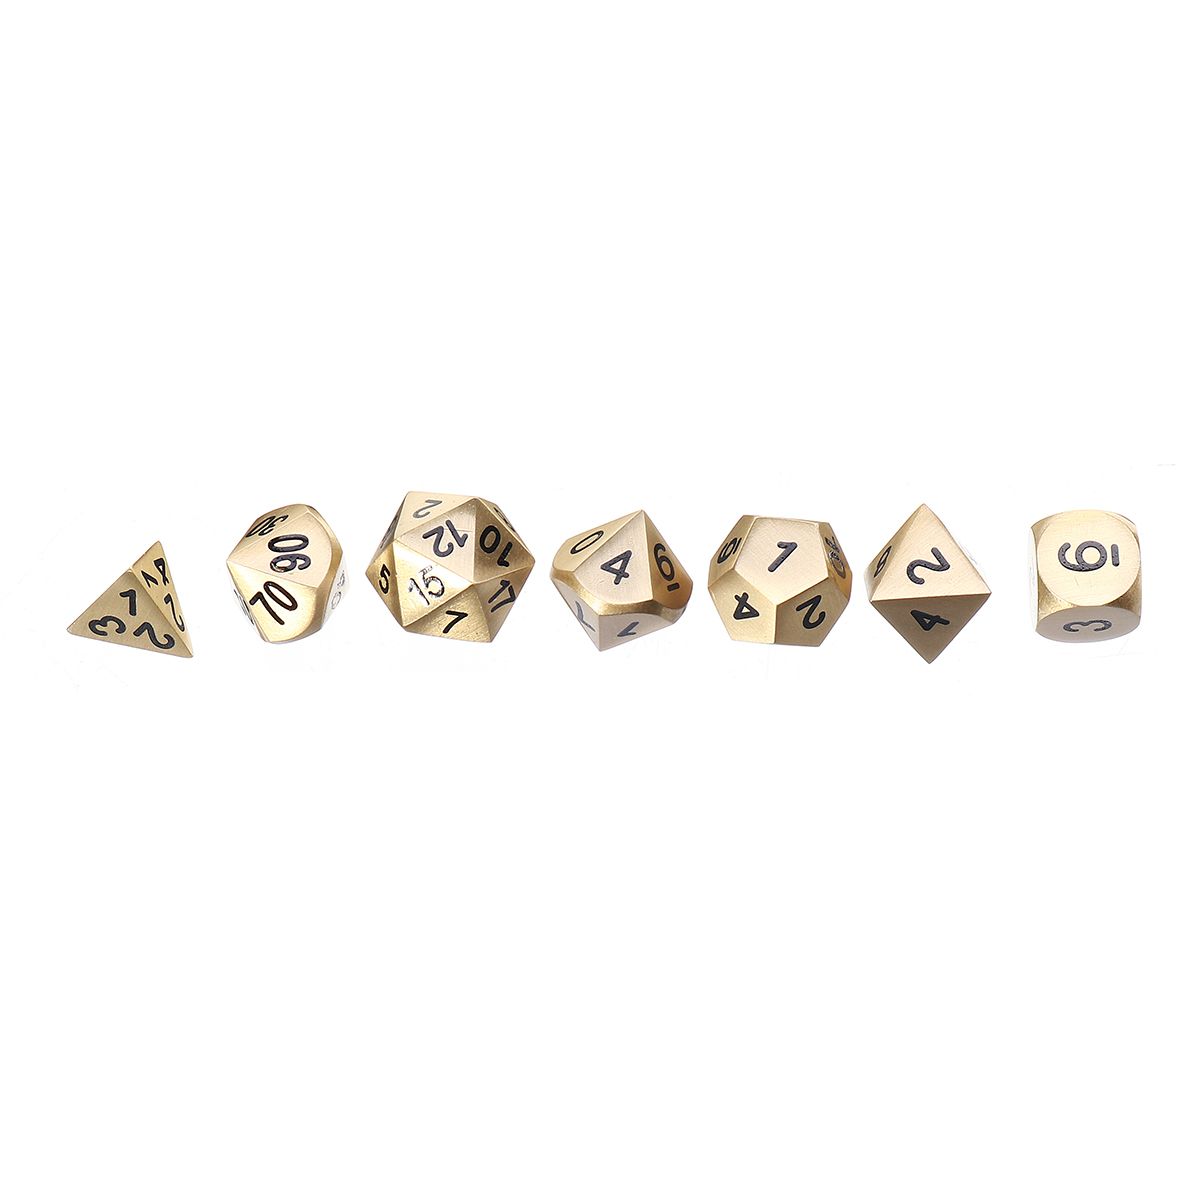 Pure-Copper-Polyhedral-Dices-Set-Metal-Role-Playing-Game-Dice-Gadget-for-Dungeons-Dragon-Games-Gift-1608120